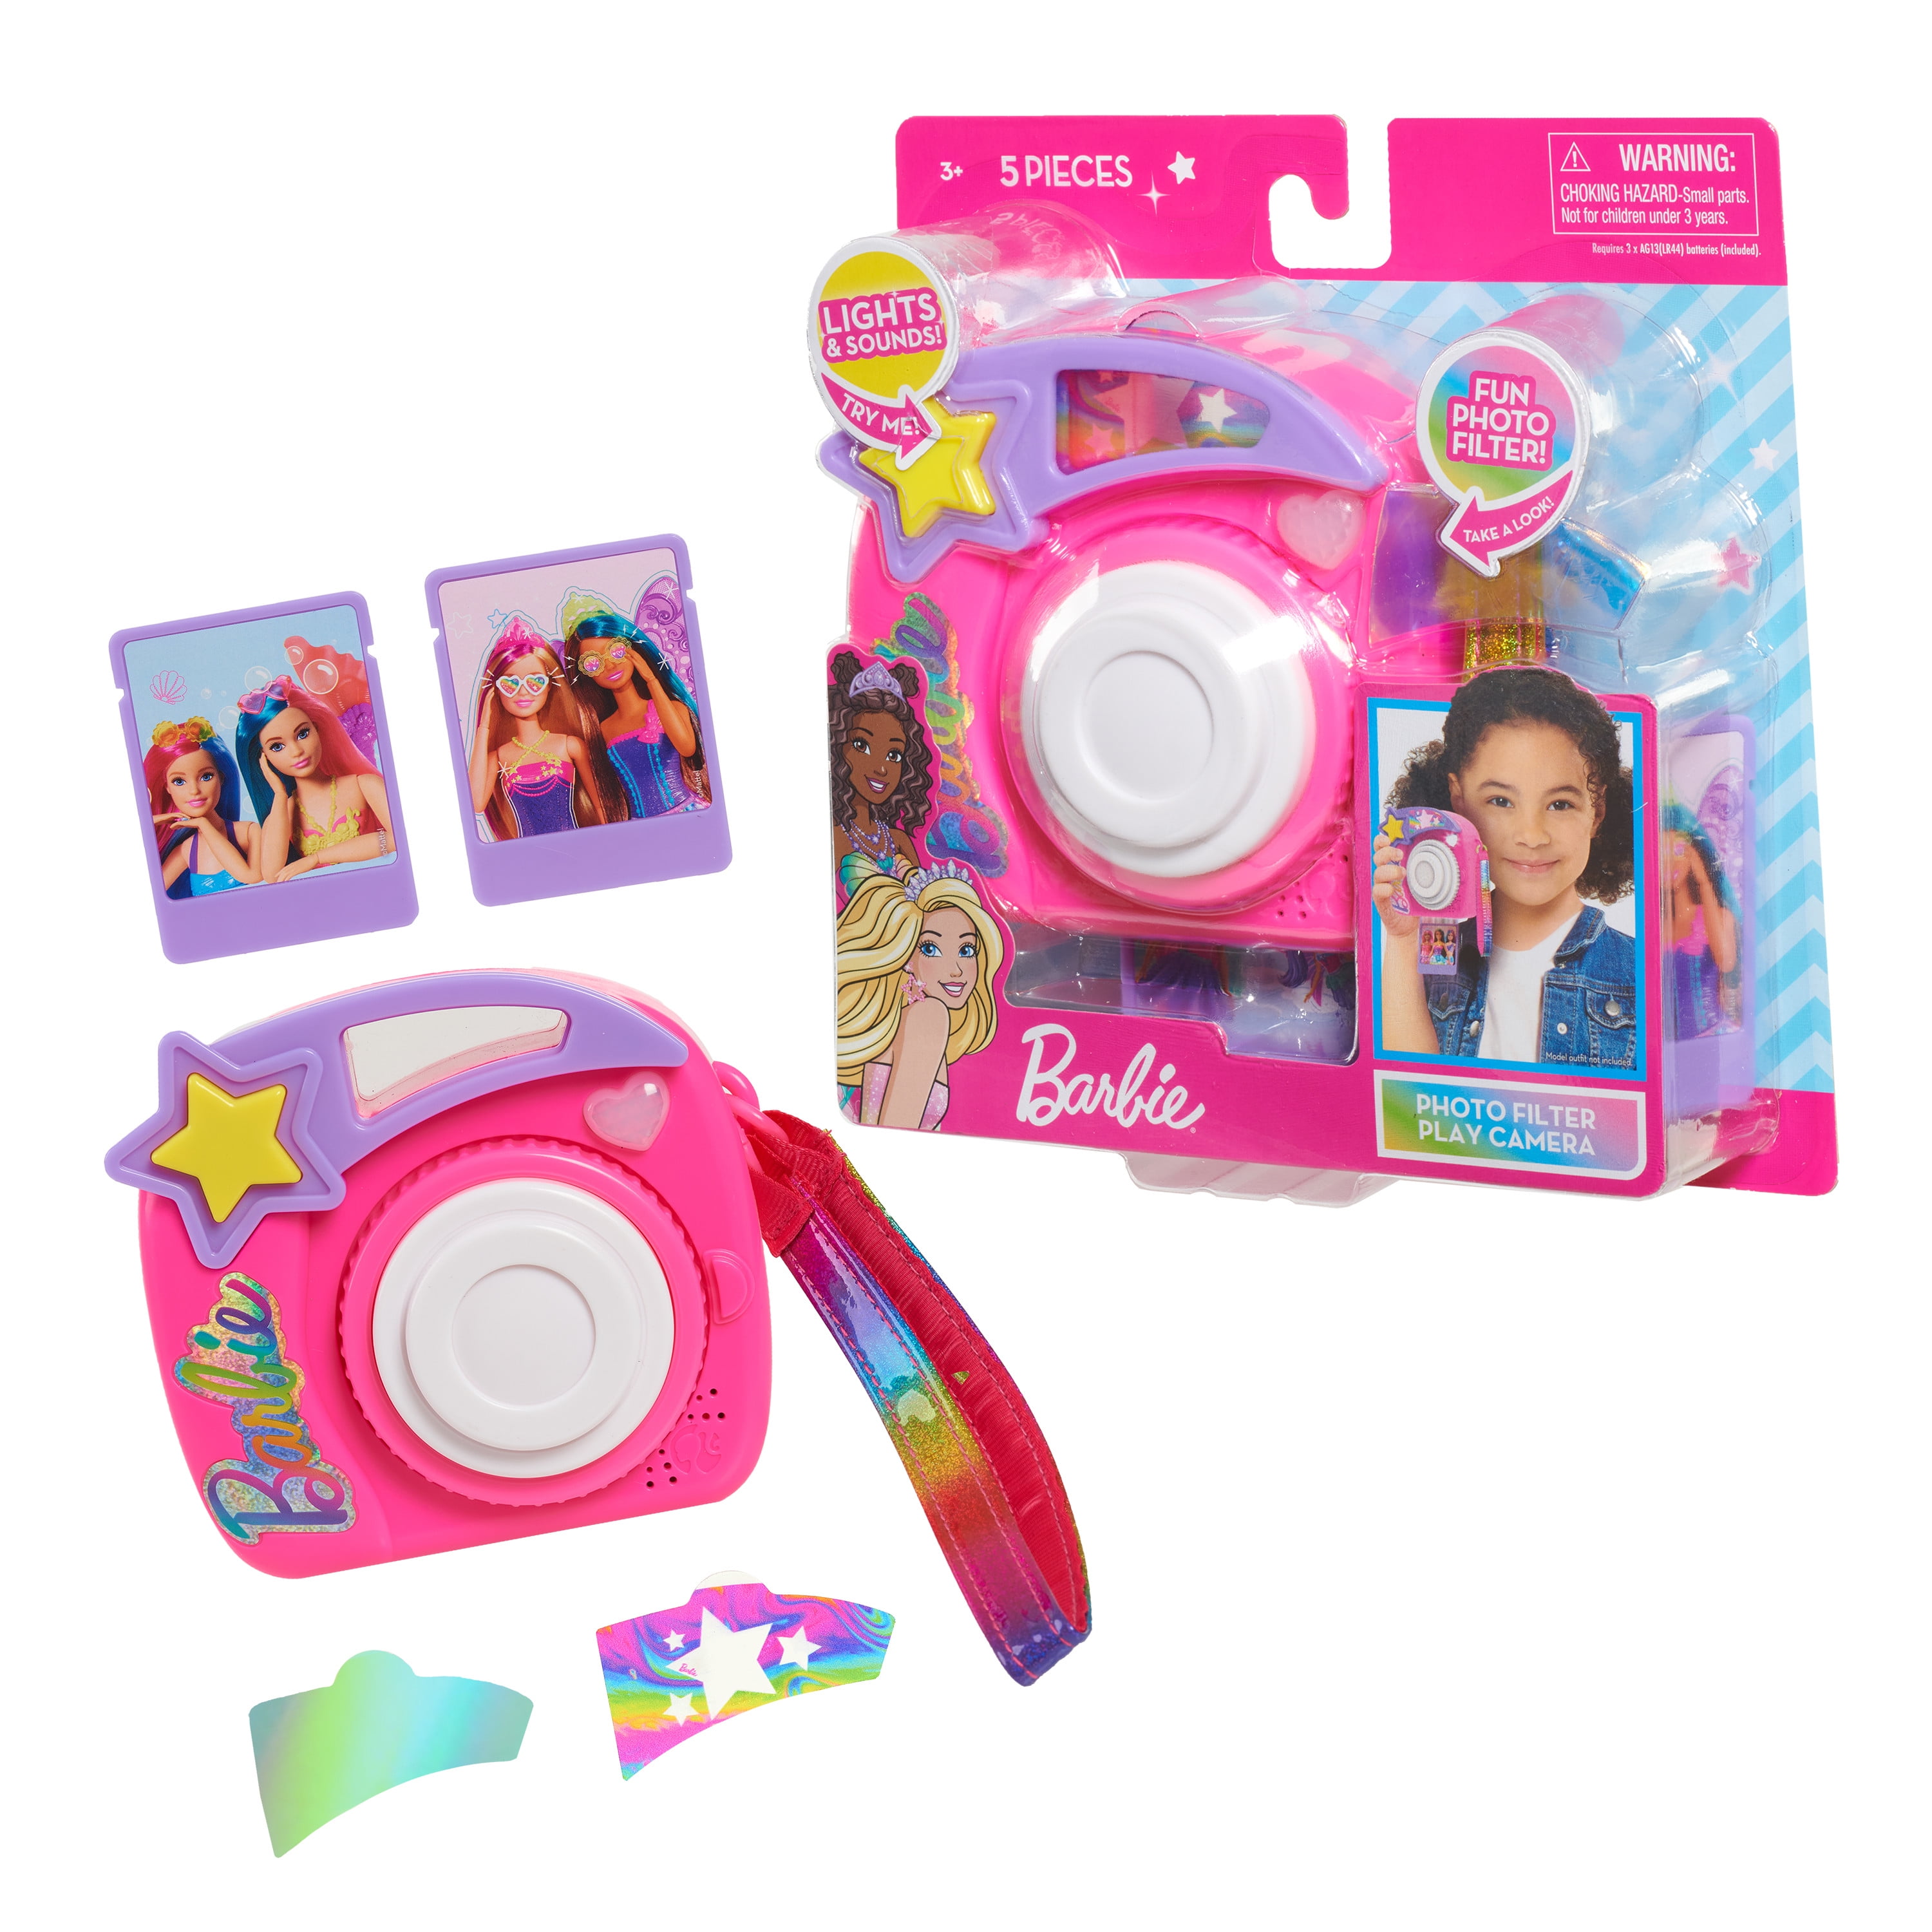 Barbie Photo Filter Play Camera 5-piece Set with Real Lights and Sounds,  Kids Toys for Ages 3 Up, Gifts and Presents